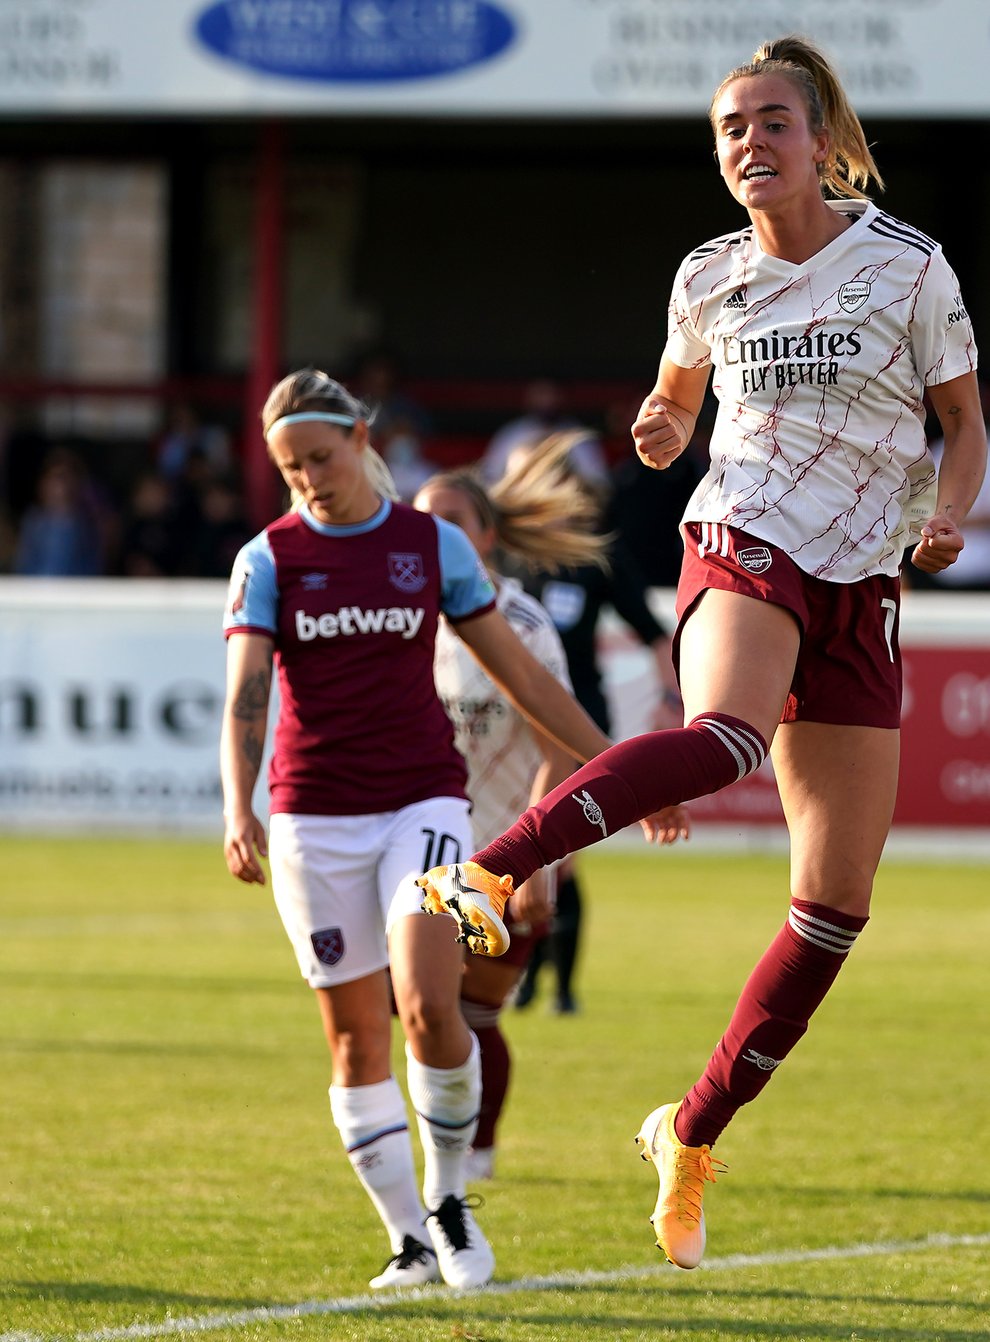 Roord has made a terrific start to the WSL season